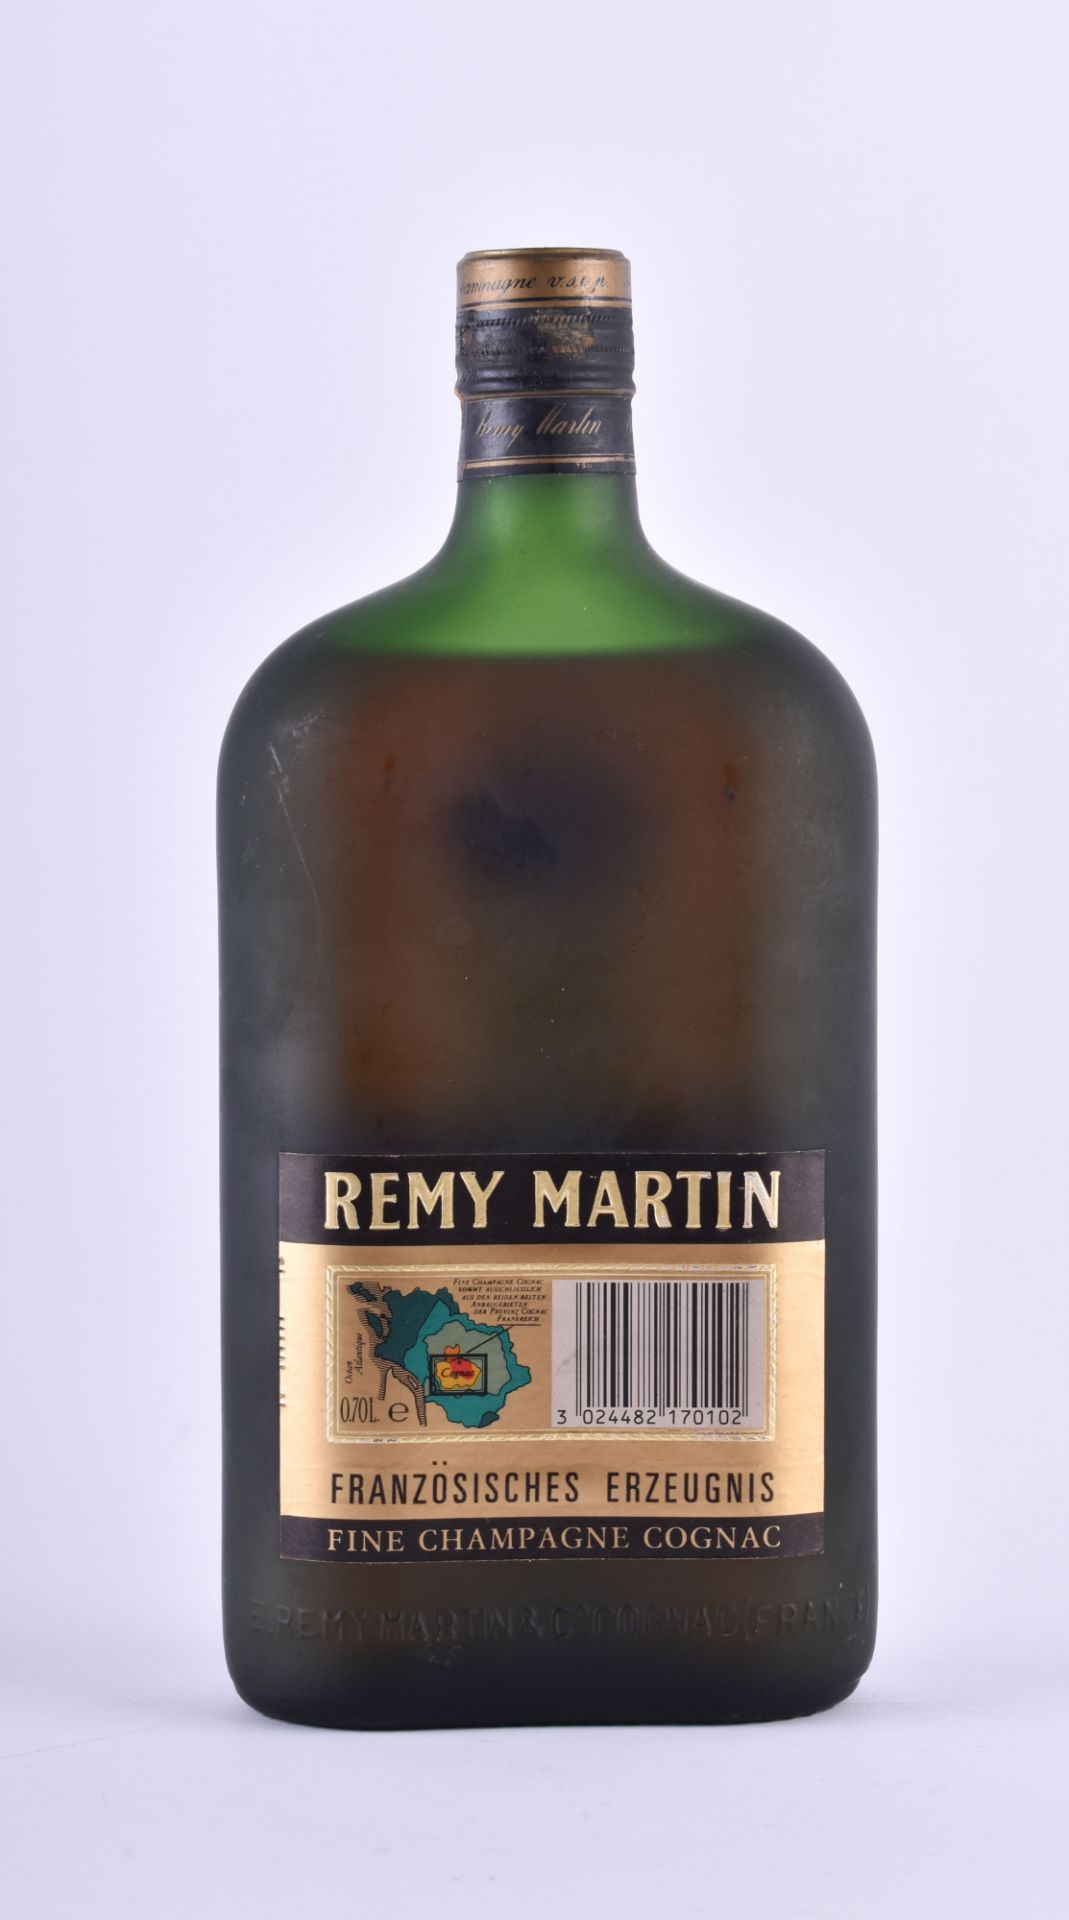 Remy Martin Cognac - Image 4 of 4